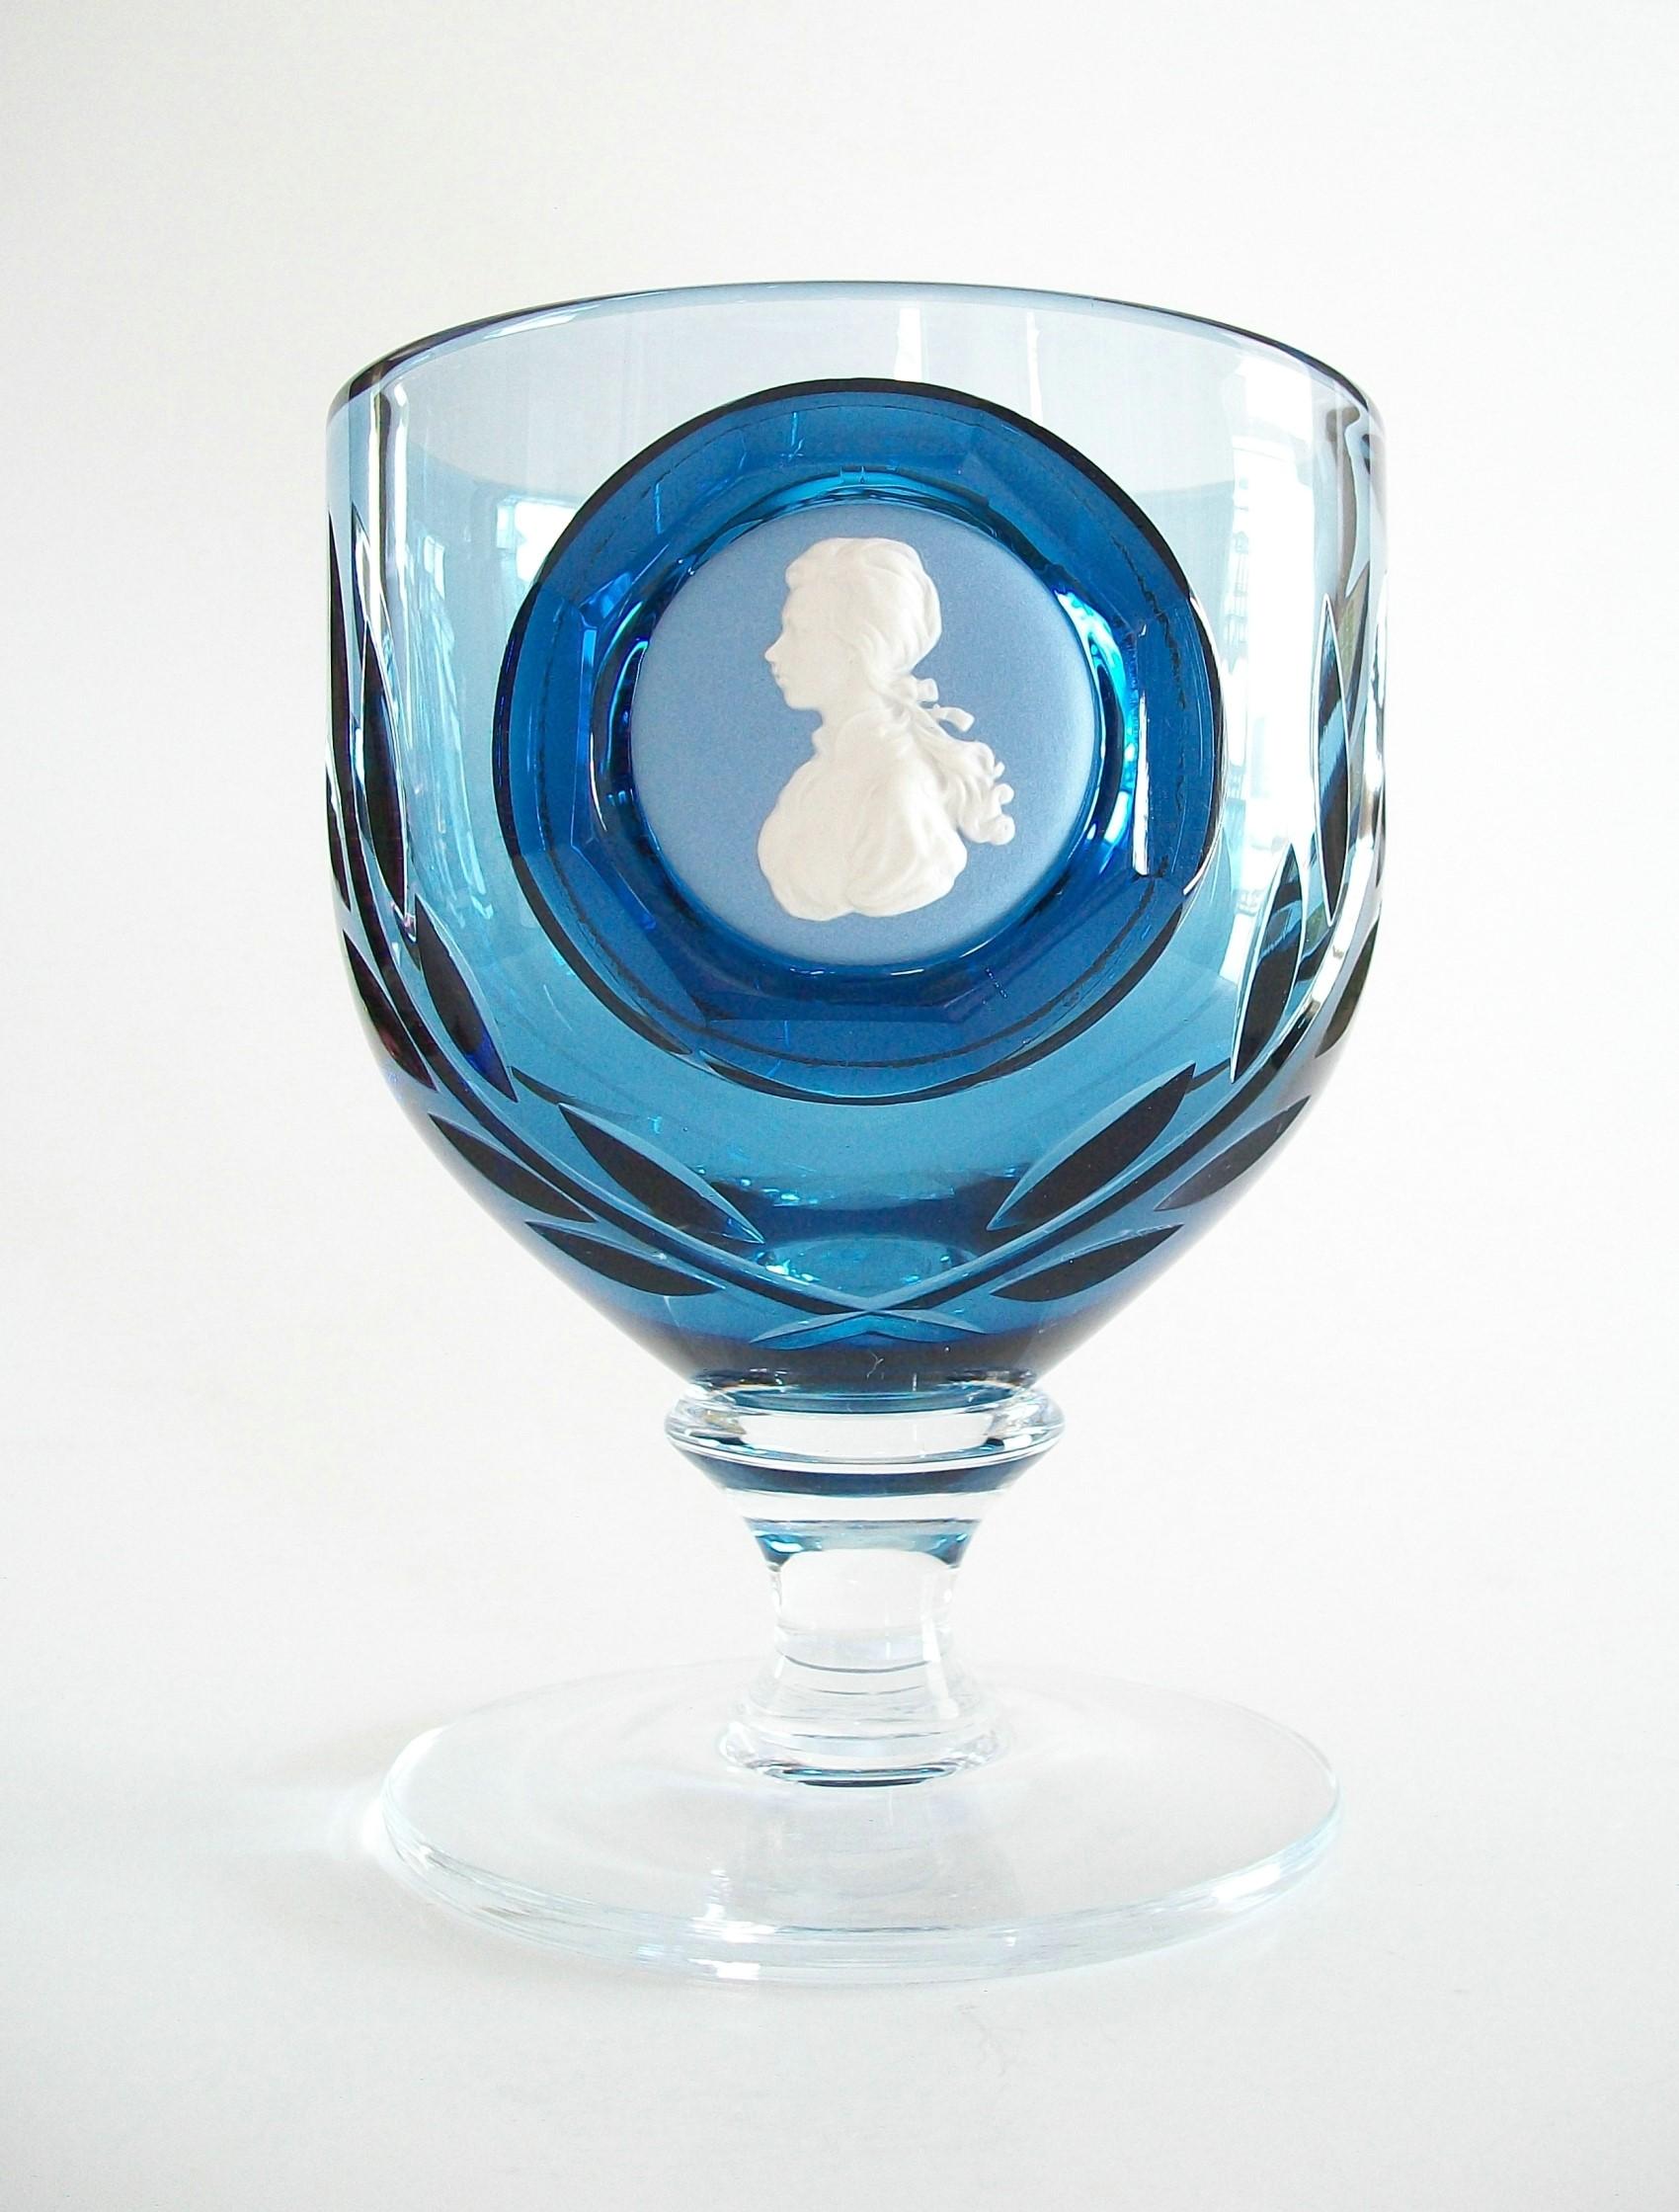 Wedgwood - Neoclassical style 'Princess Anne' wedding commemorative lead crystal goblet with blue jasperware medallion and etched/wheel cut laurel leaves - blue crystal bowl with clear stem and base - number 448 etched on the base - signed on the